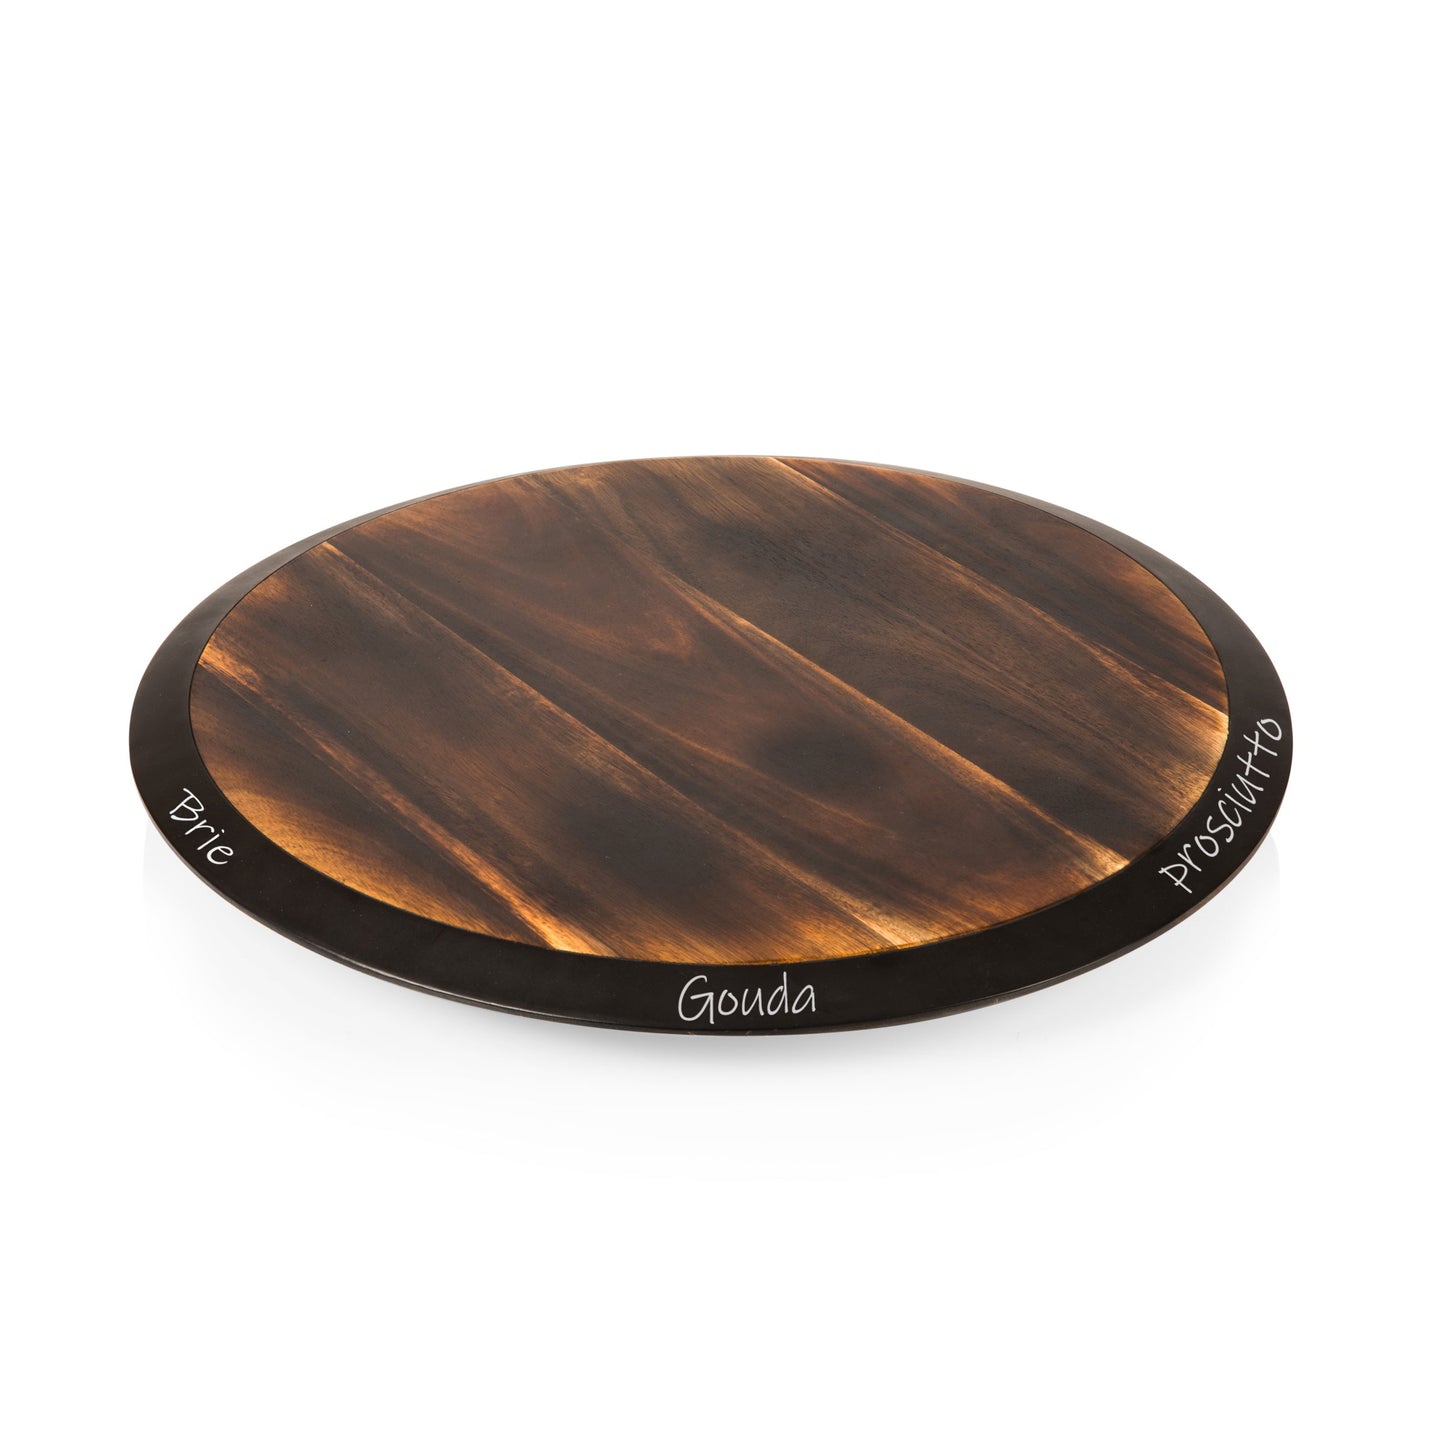 Lazy Susan Serving Tray